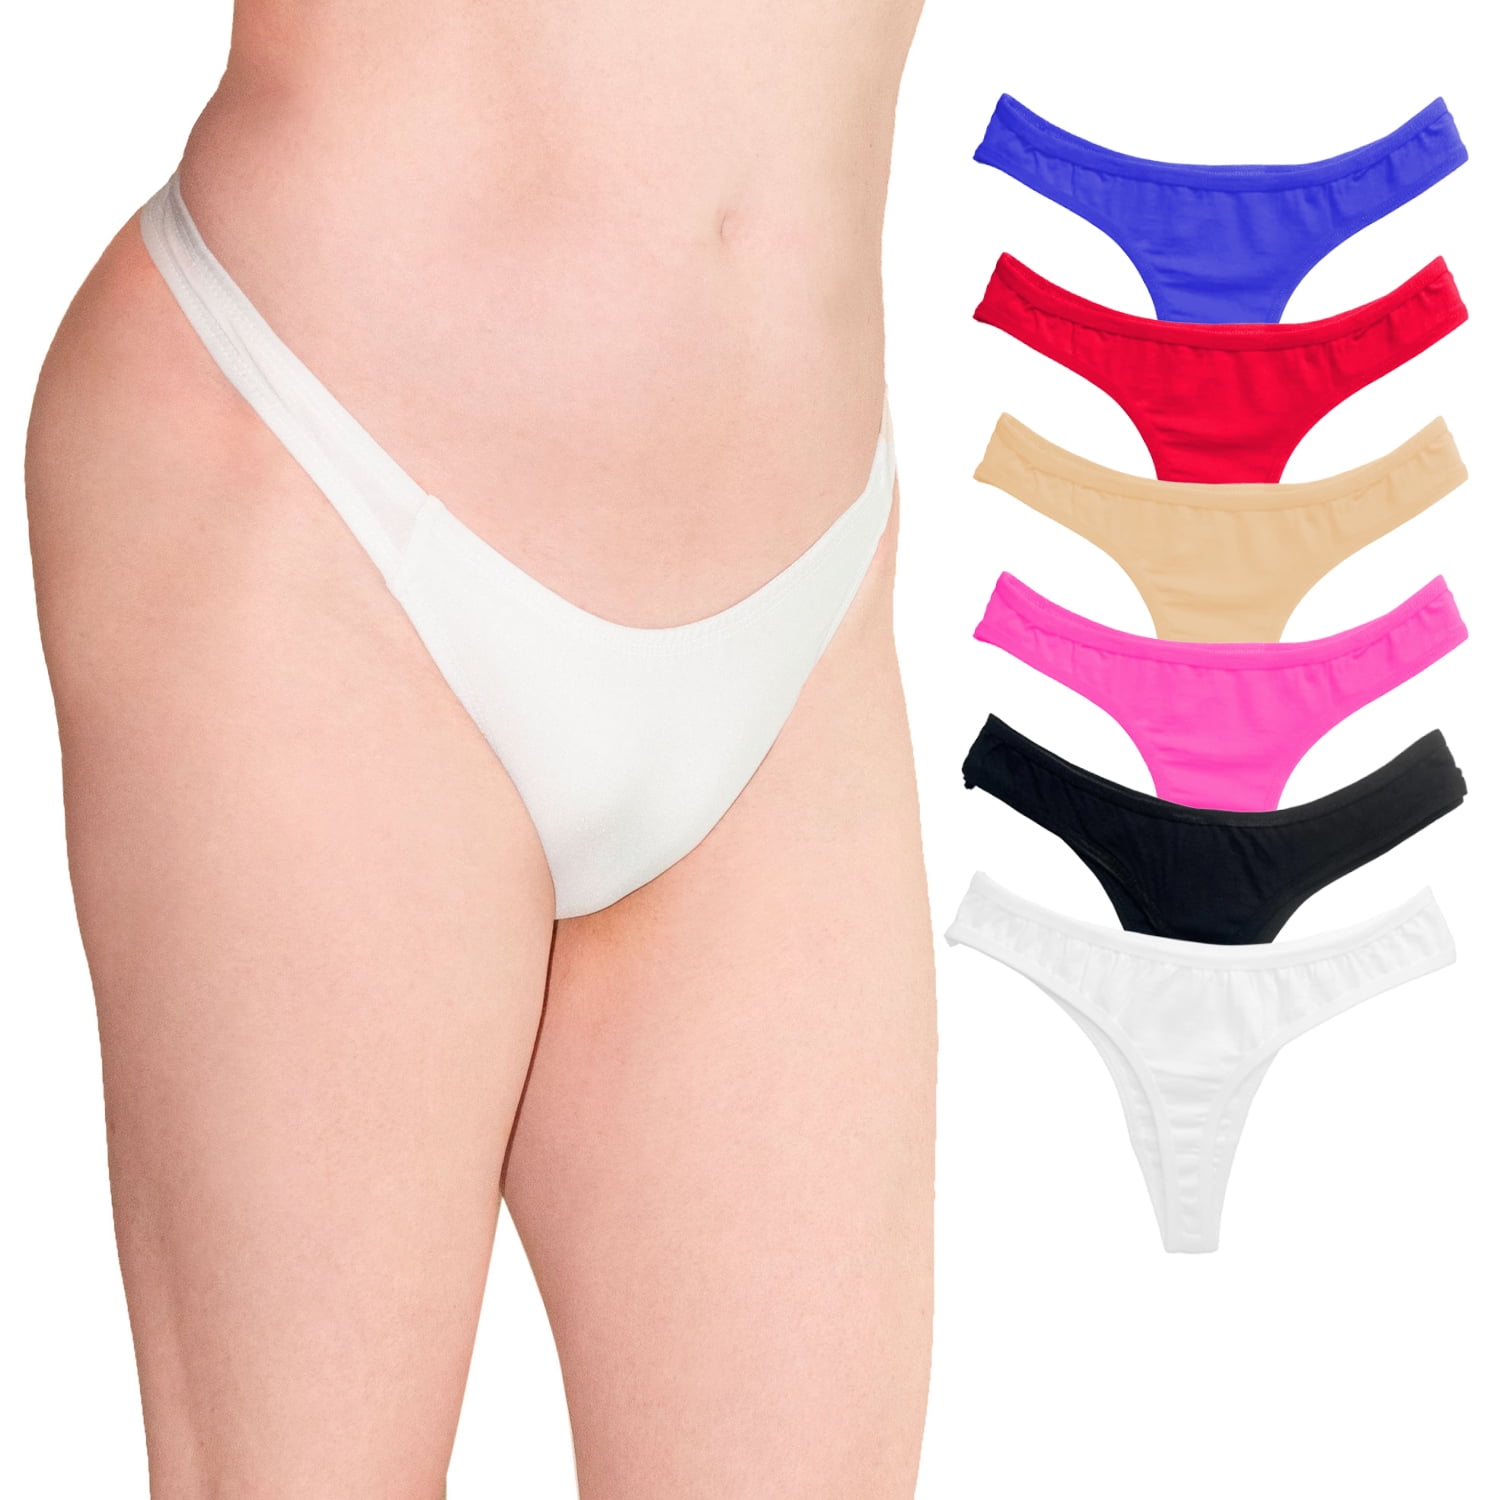 Glamour Boutique's Gaff Thong Underwear Male to Female Tucking Panties  Medium, Pink 